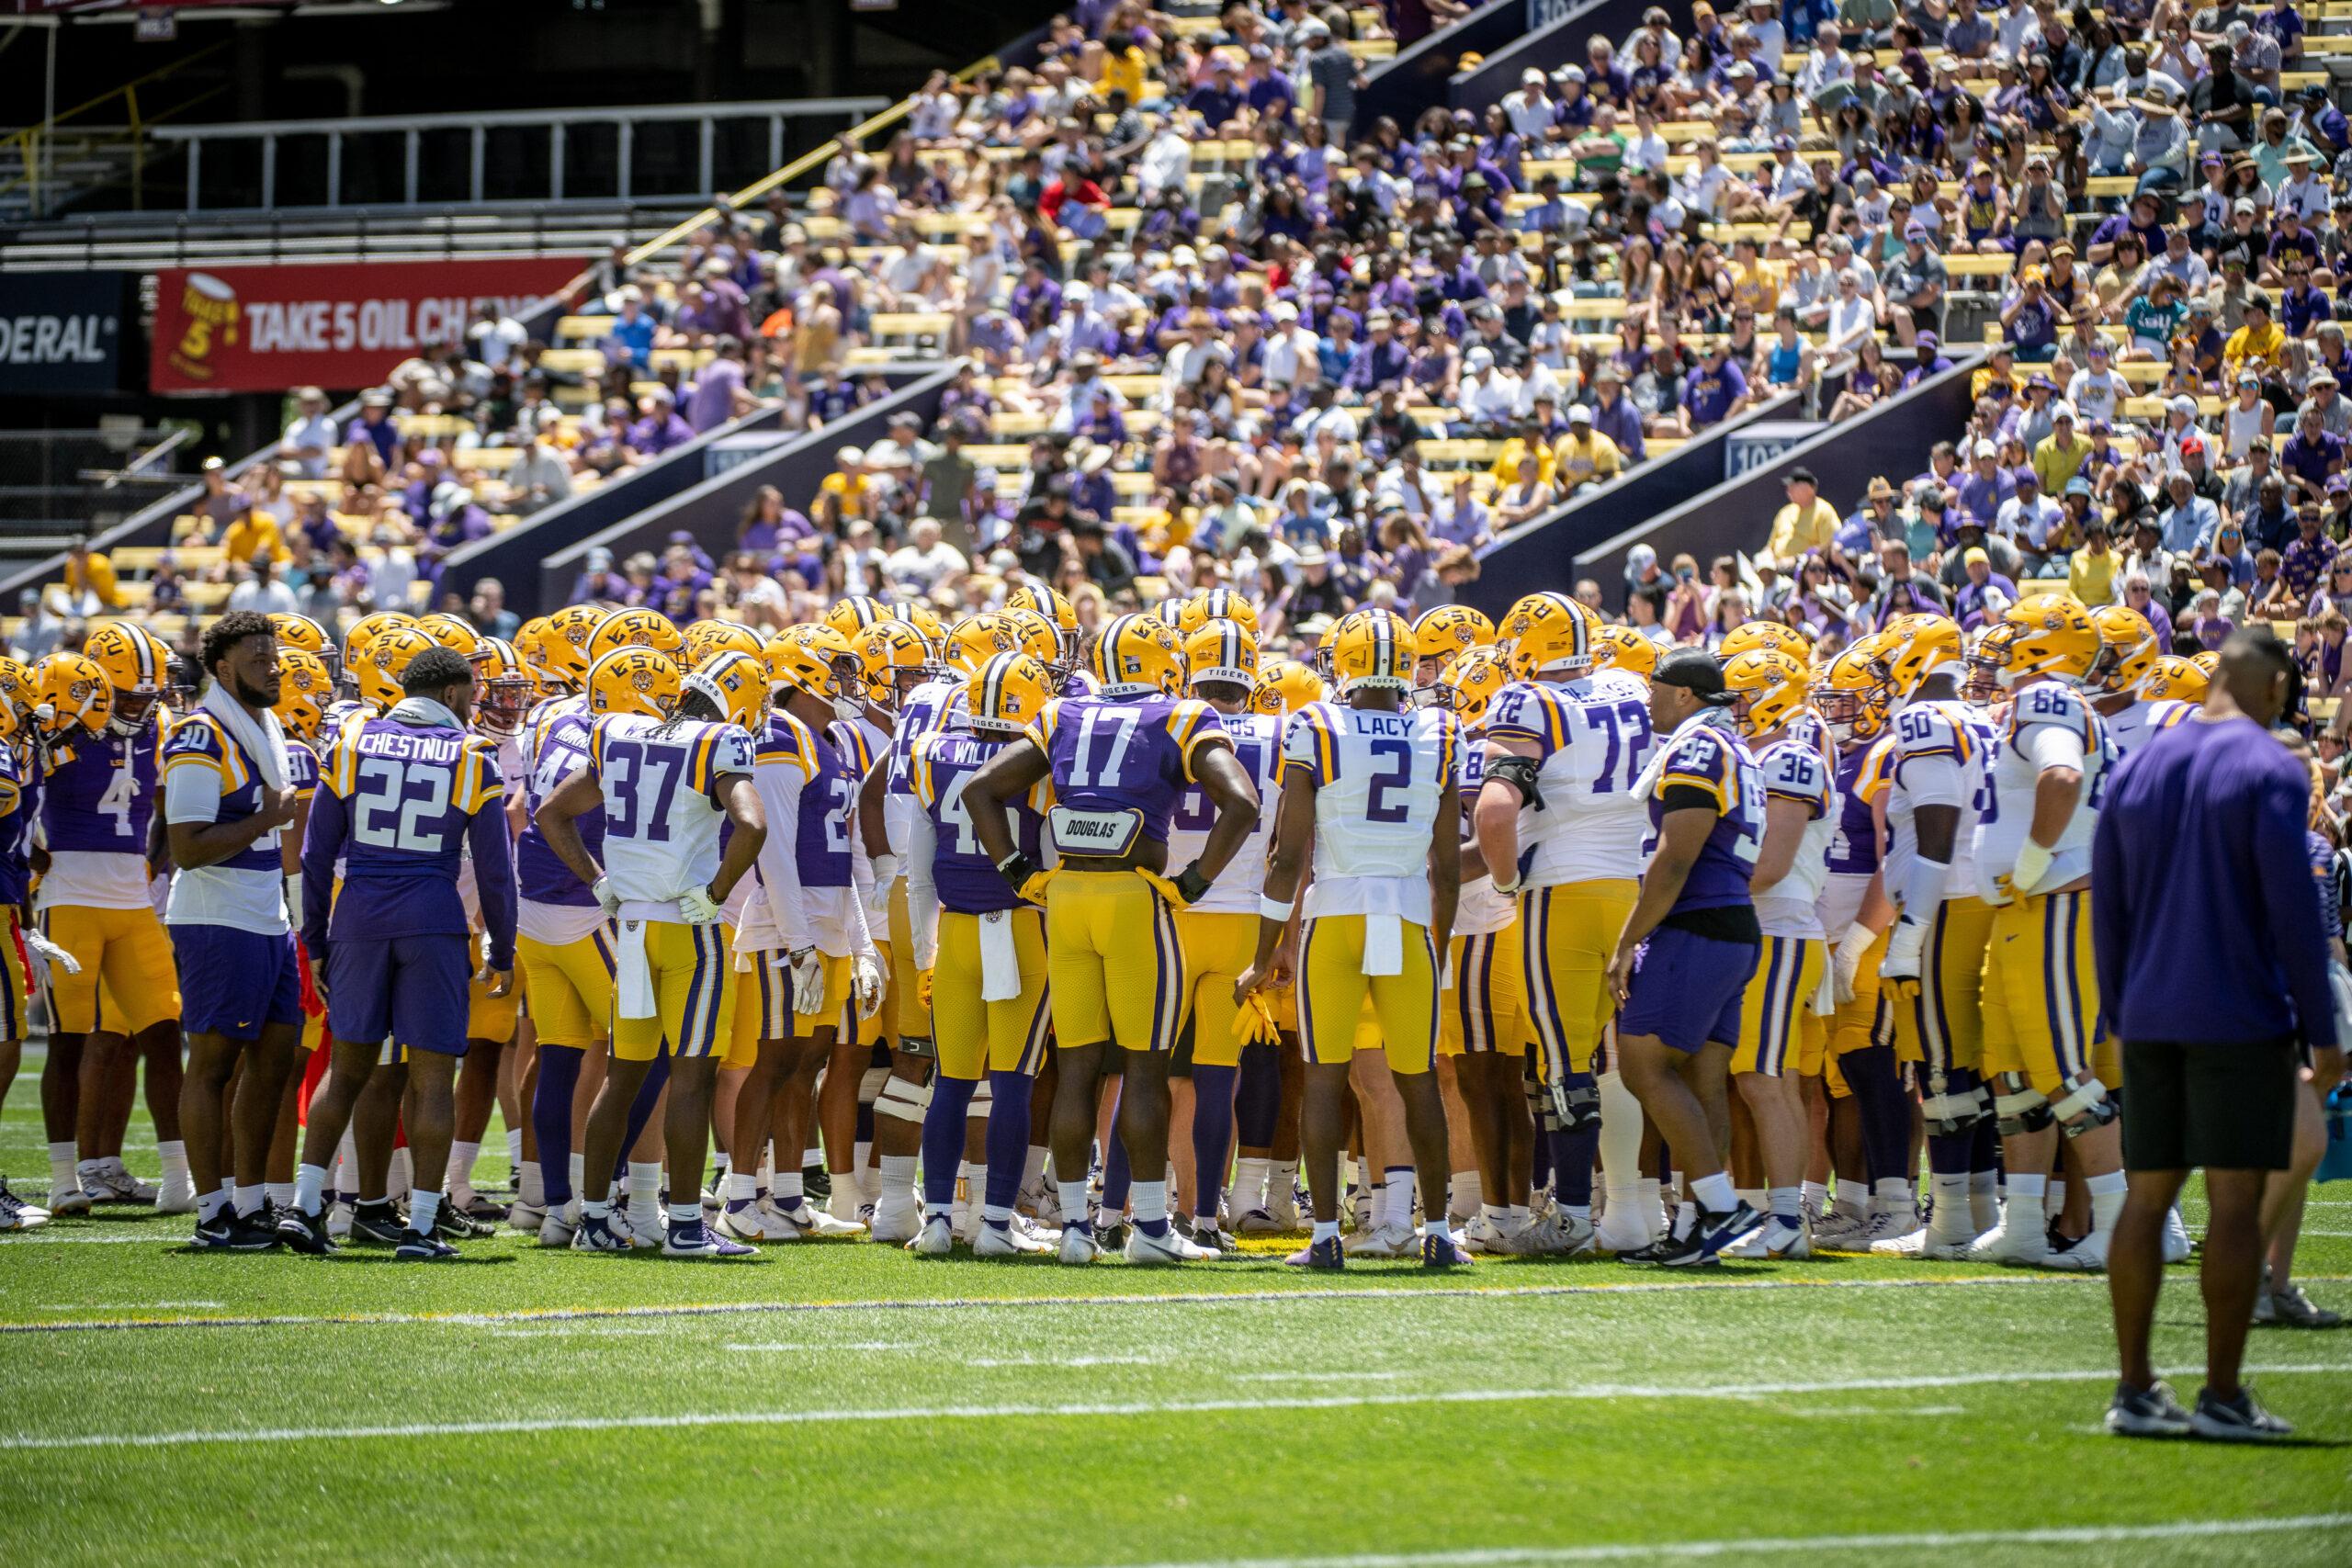 Kaleb Jackson, Zy Alexander Come Out As Big Winners In LSU Fall Scrimmage